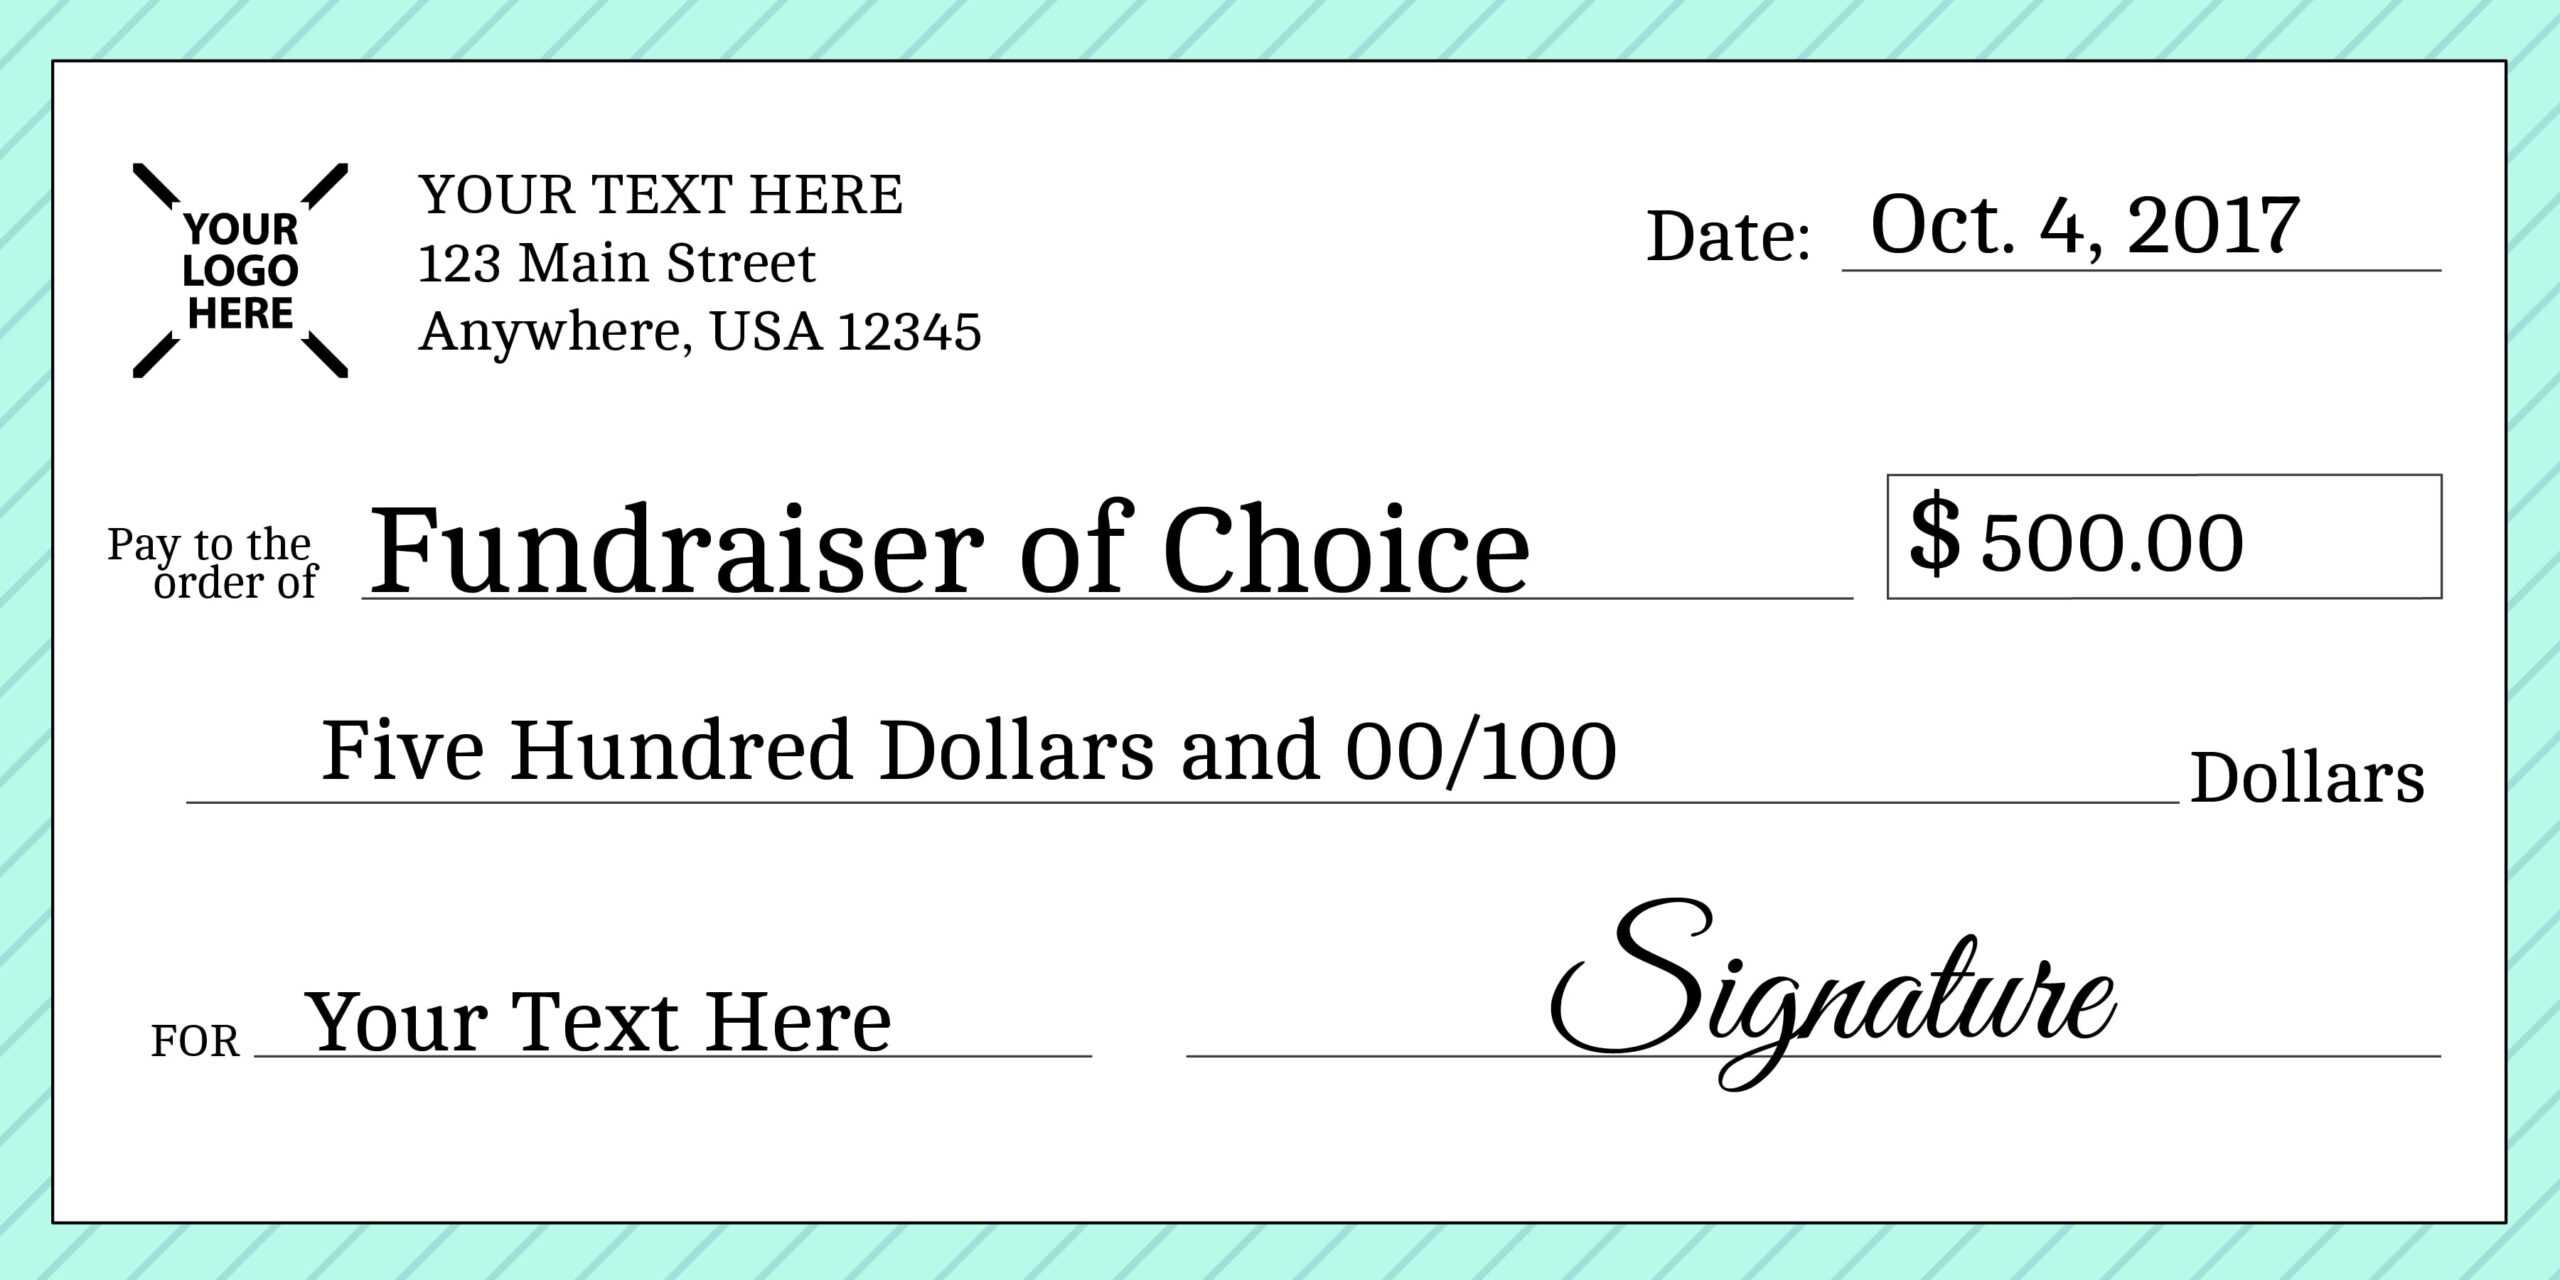 008 Blank Check Template Pdf Free Stunning Ideas Fillable Intended For Blank Cheque Template Uk